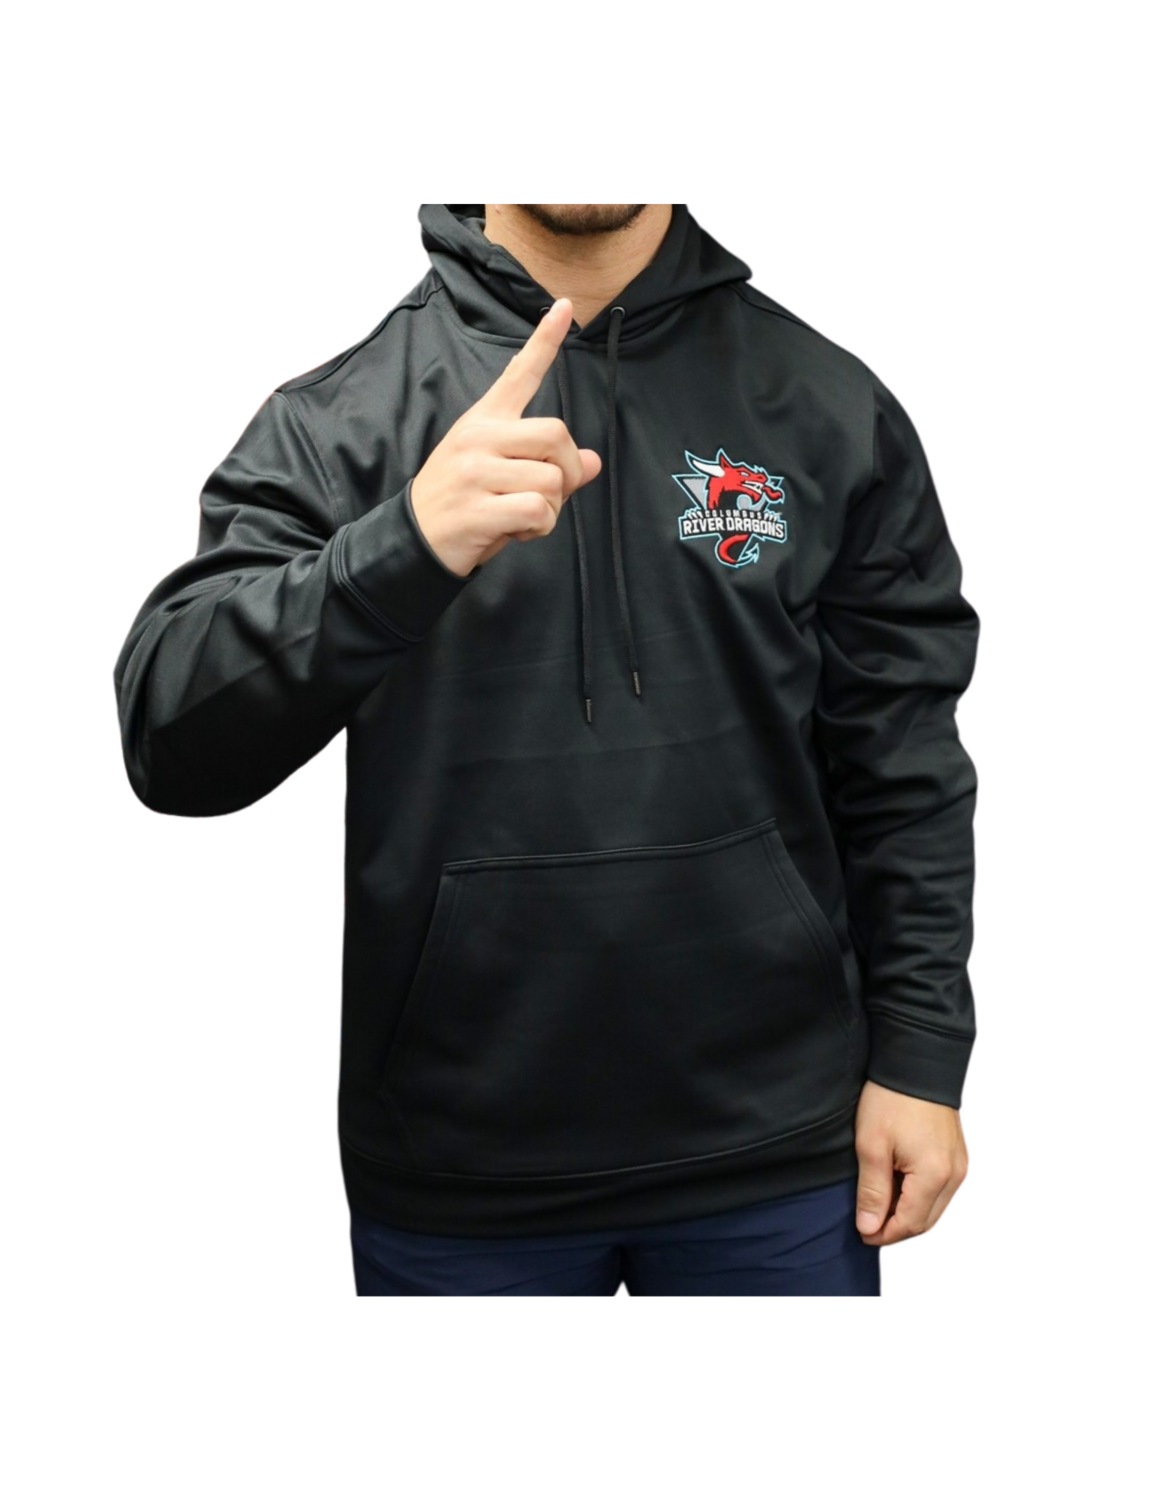 Main Logo Black Sport-Wick Embroidered Hoodie